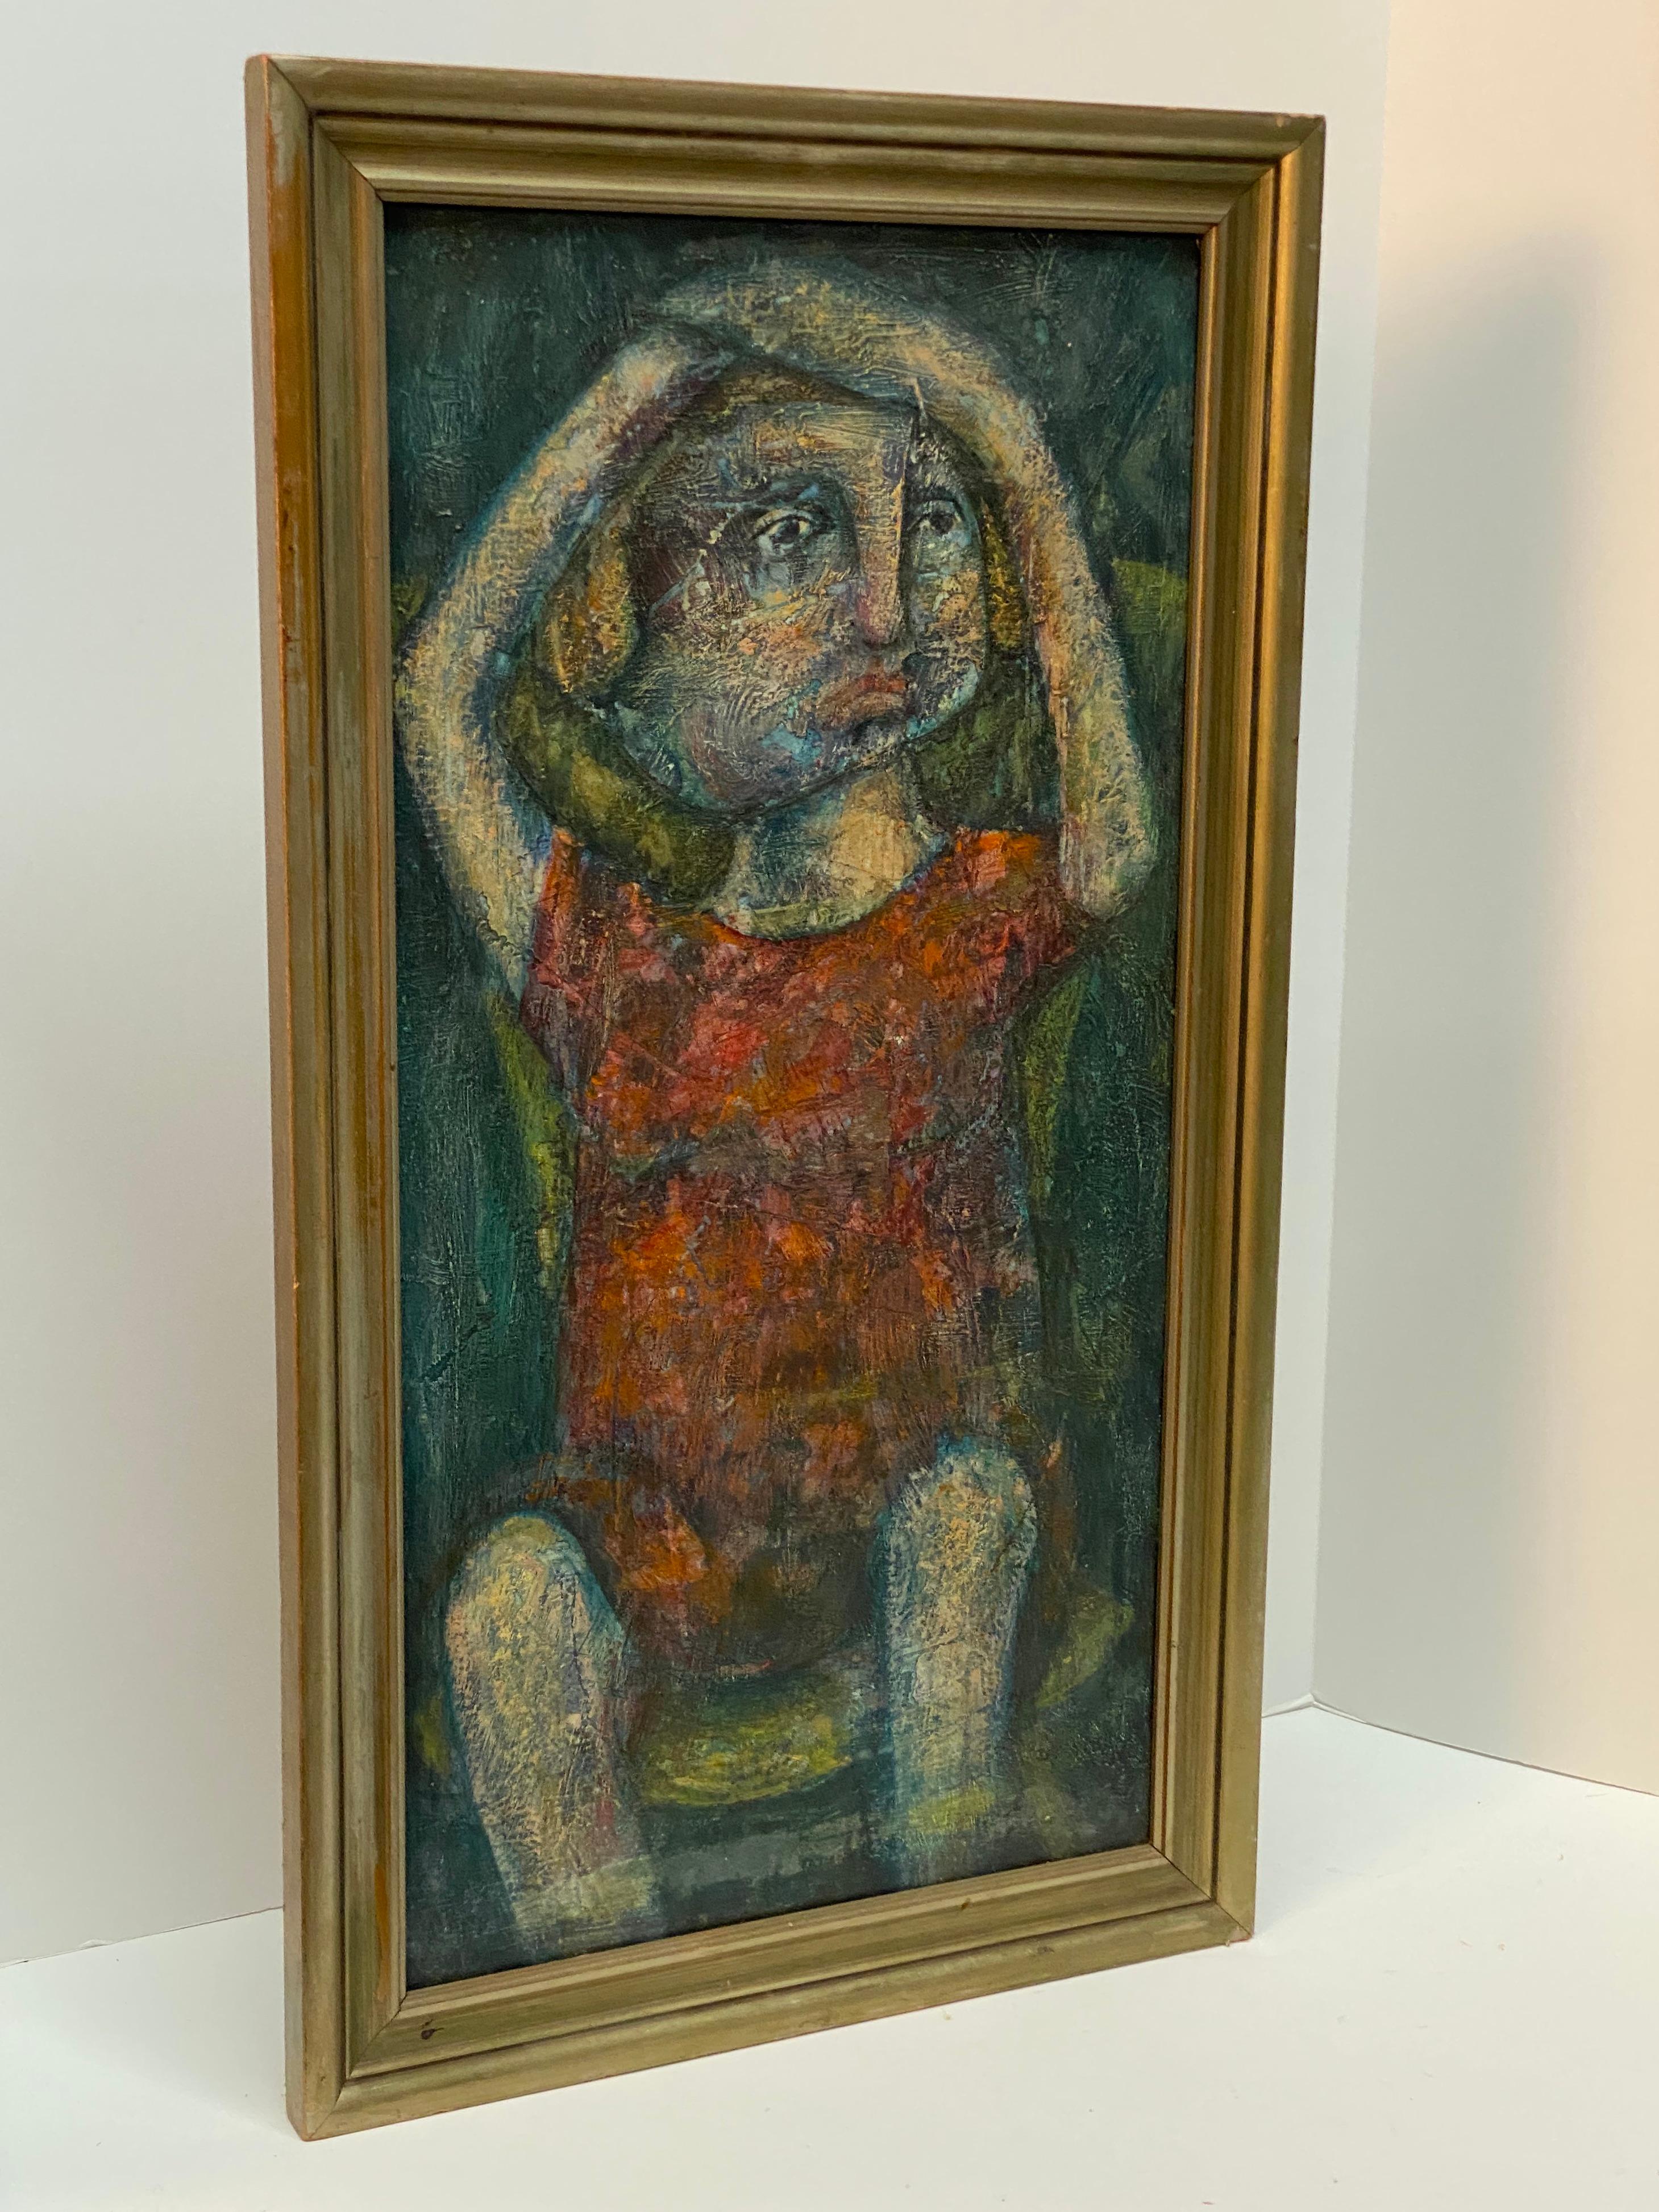 A somber rendering of a young girl with a page boy haircut wearing a red dress seated in a high back chair. Her arms are raised above her head. Oil paint on board. Entitled 